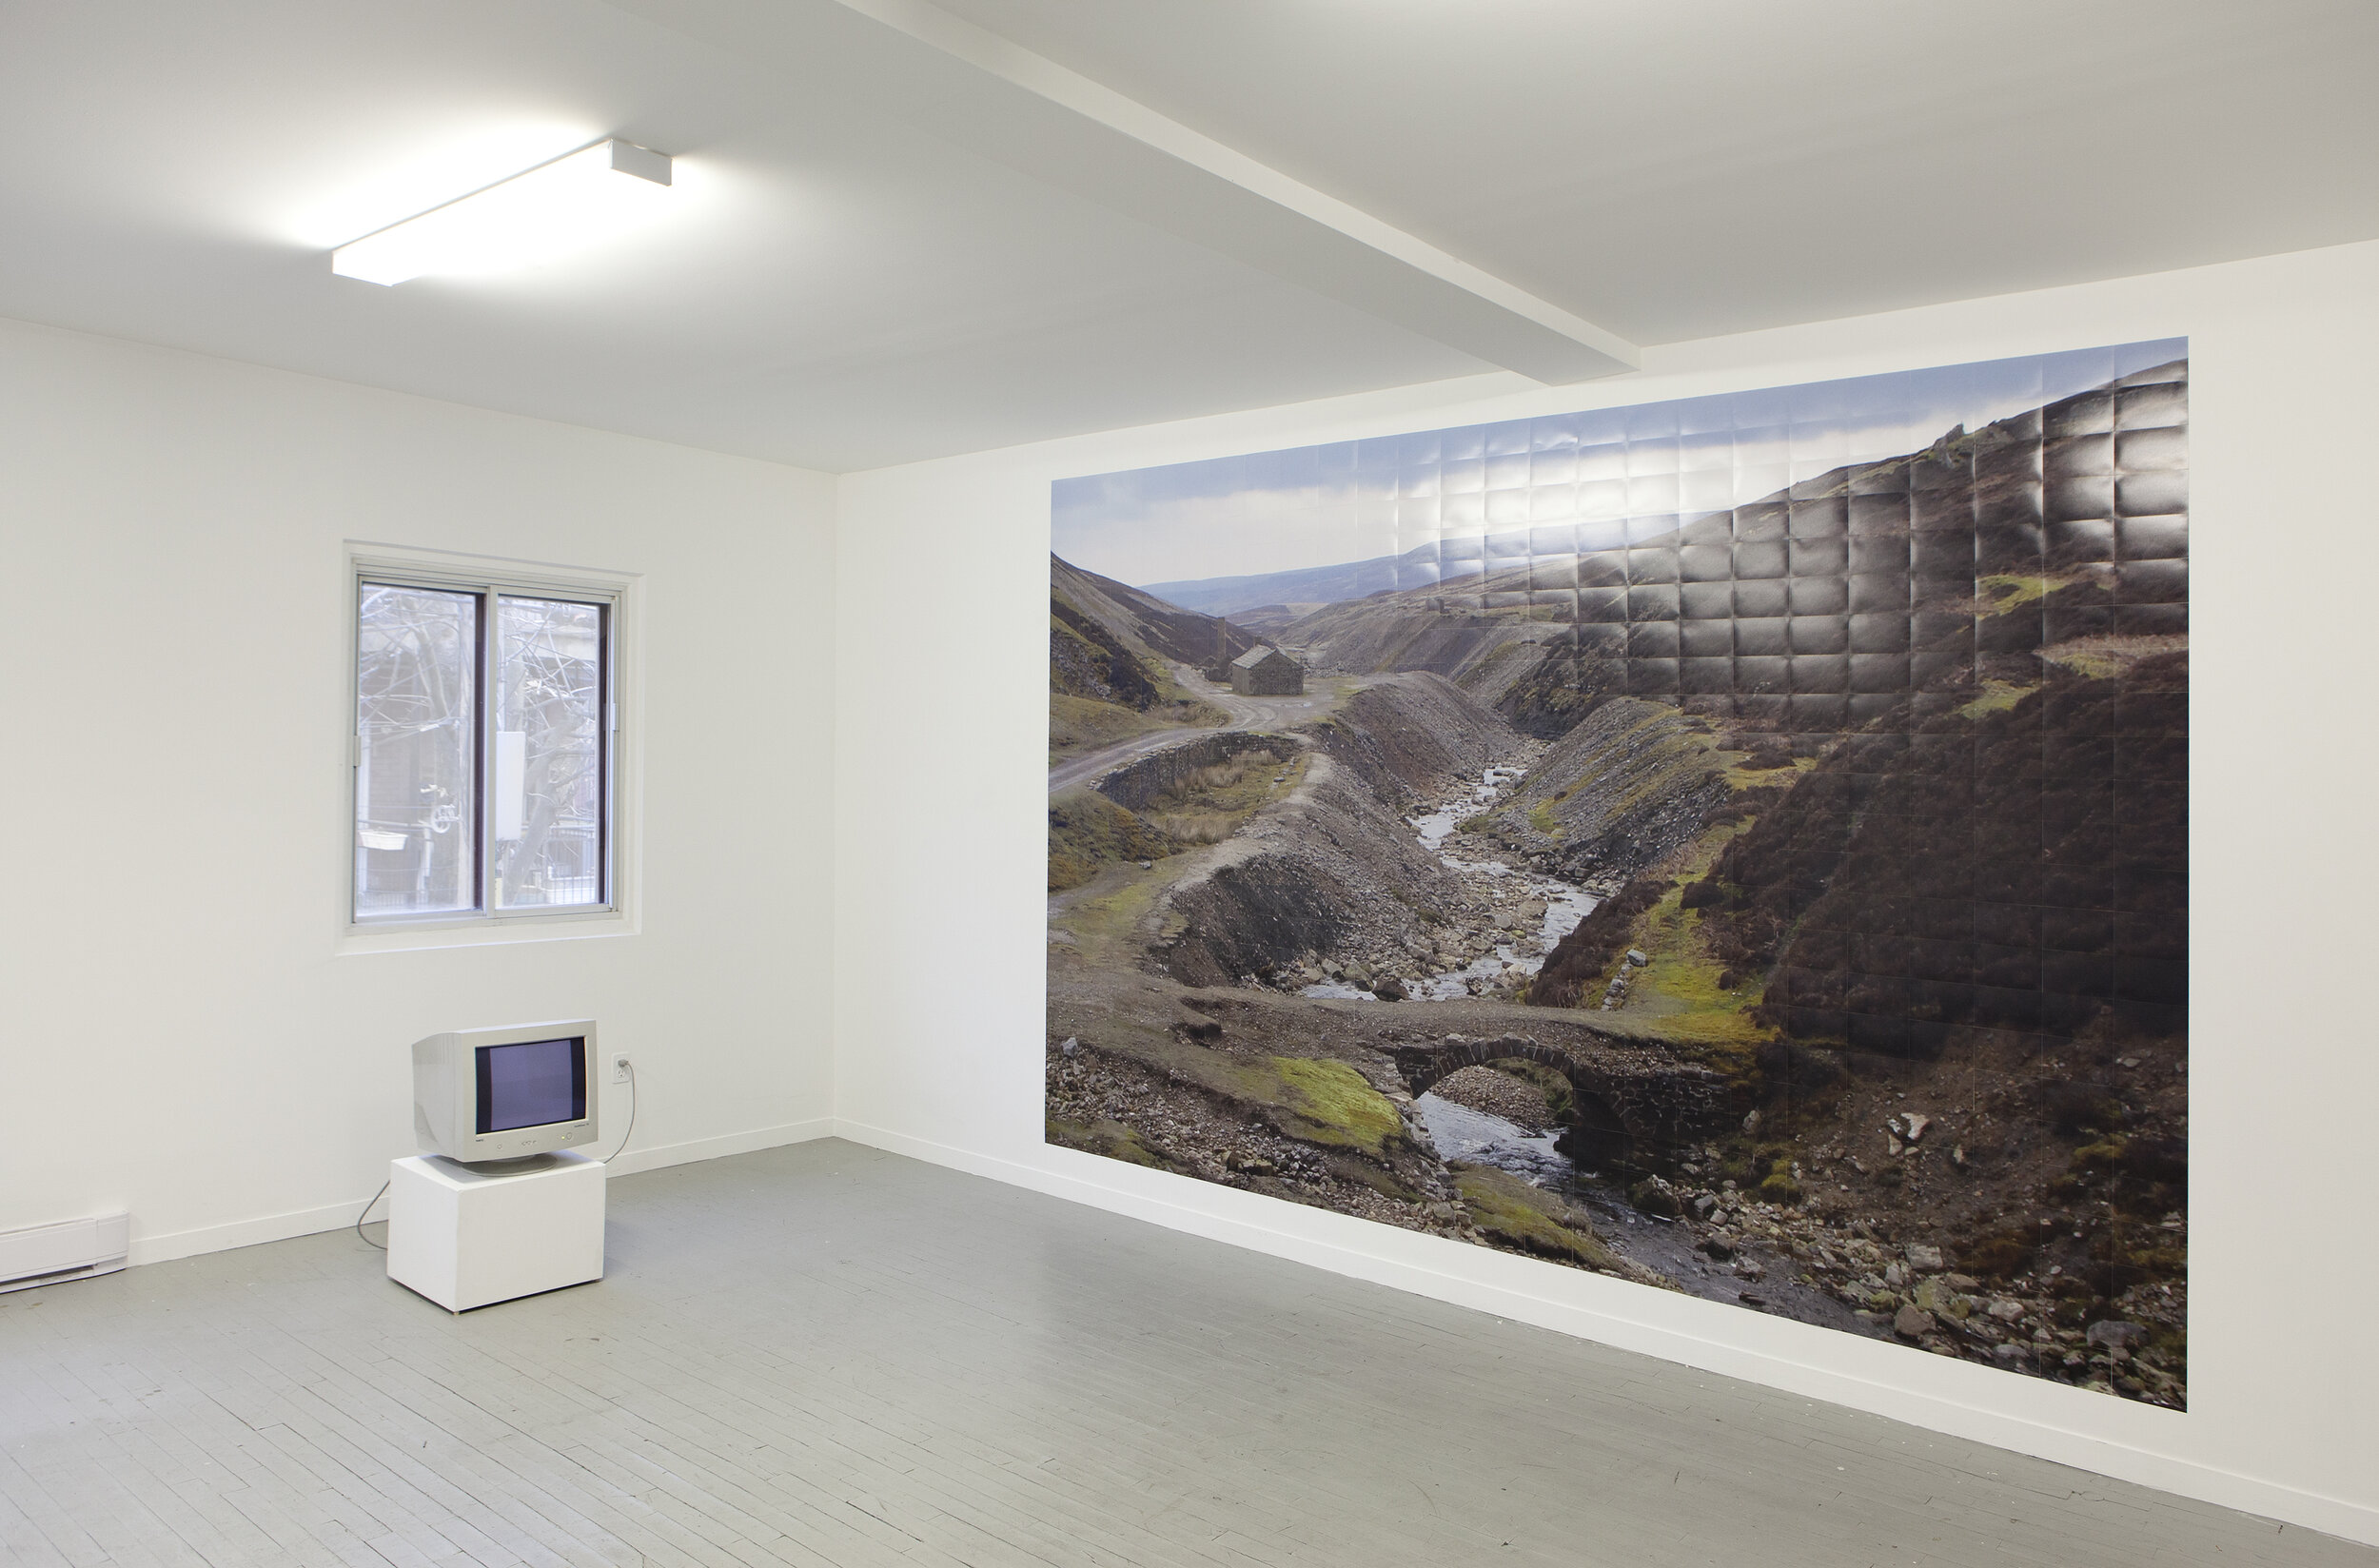   Landslideshow,  2012 – 2013, 576 digital c-prints ( 8’ x 12’) and 12 hour video played on a cathode ray tube computer monitor 